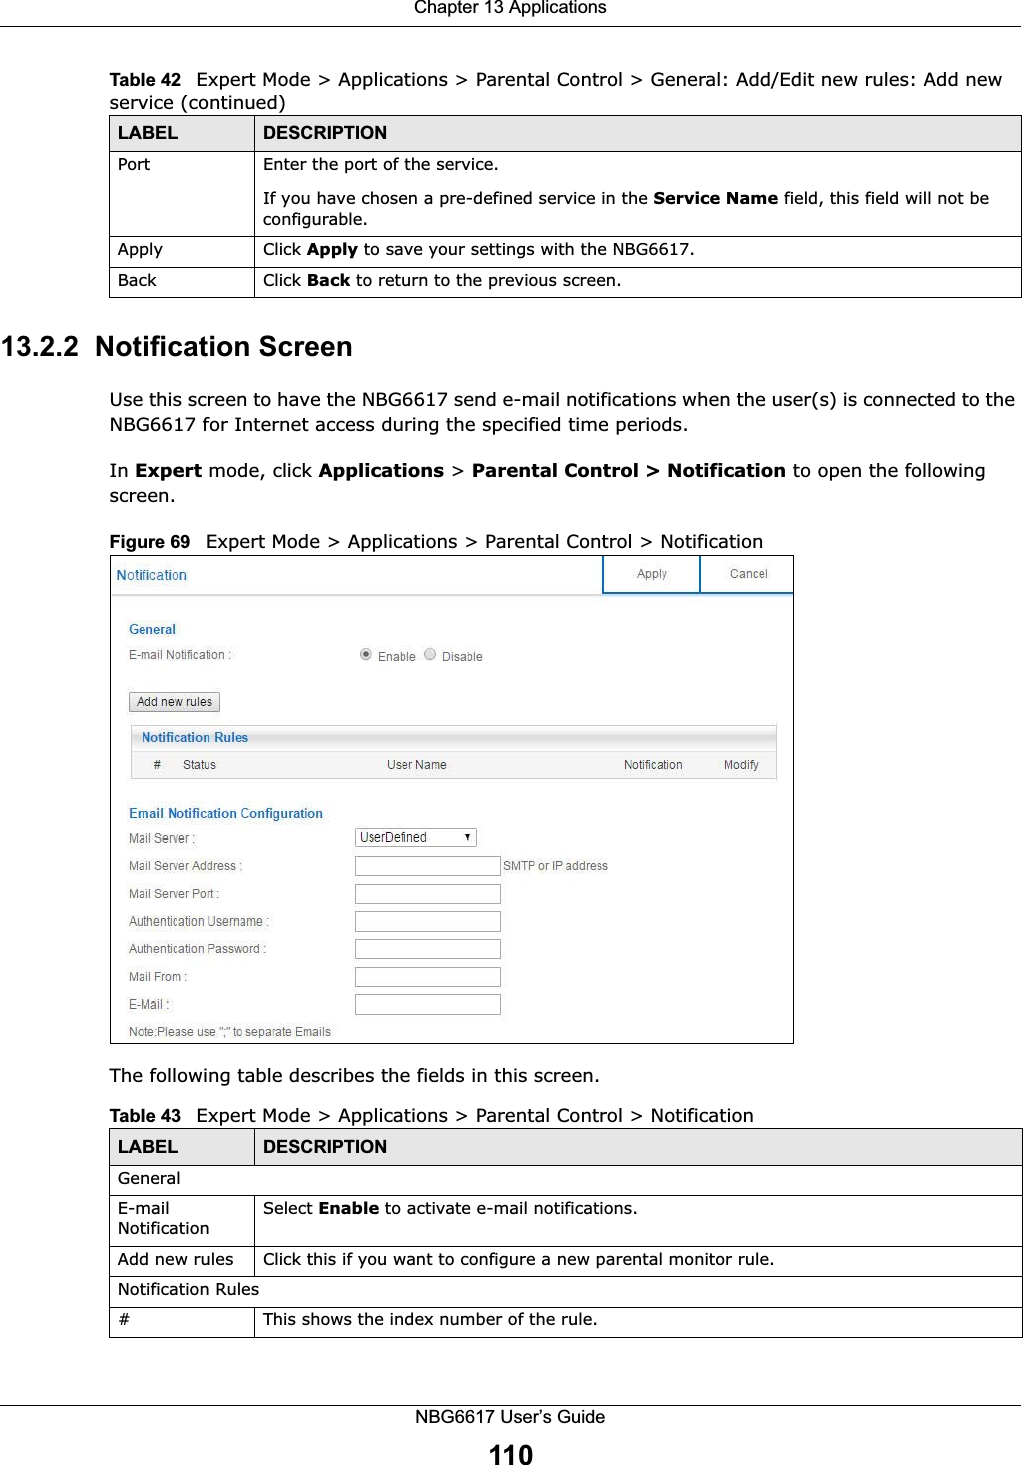 Chapter 13 ApplicationsNBG6617 User’s Guide11013.2.2  Notification ScreenUse this screen to have the NBG6617 send e-mail notifications when the user(s) is connected to the NBG6617 for Internet access during the specified time periods.In Expert mode, click Applications &gt; Parental Control &gt; Notification to open the following screen. Figure 69   Expert Mode &gt; Applications &gt; Parental Control &gt; Notification The following table describes the fields in this screen. Port Enter the port of the service. If you have chosen a pre-defined service in the Service Name field, this field will not be configurable.Apply Click Apply to save your settings with the NBG6617.Back Click Back to return to the previous screen.Table 42   Expert Mode &gt; Applications &gt; Parental Control &gt; General: Add/Edit new rules: Add new service (continued)LABEL DESCRIPTIONTable 43   Expert Mode &gt; Applications &gt; Parental Control &gt; Notification LABEL DESCRIPTIONGeneralE-mail NotificationSelect Enable to activate e-mail notifications.Add new rules Click this if you want to configure a new parental monitor rule.Notification Rules#This shows the index number of the rule.